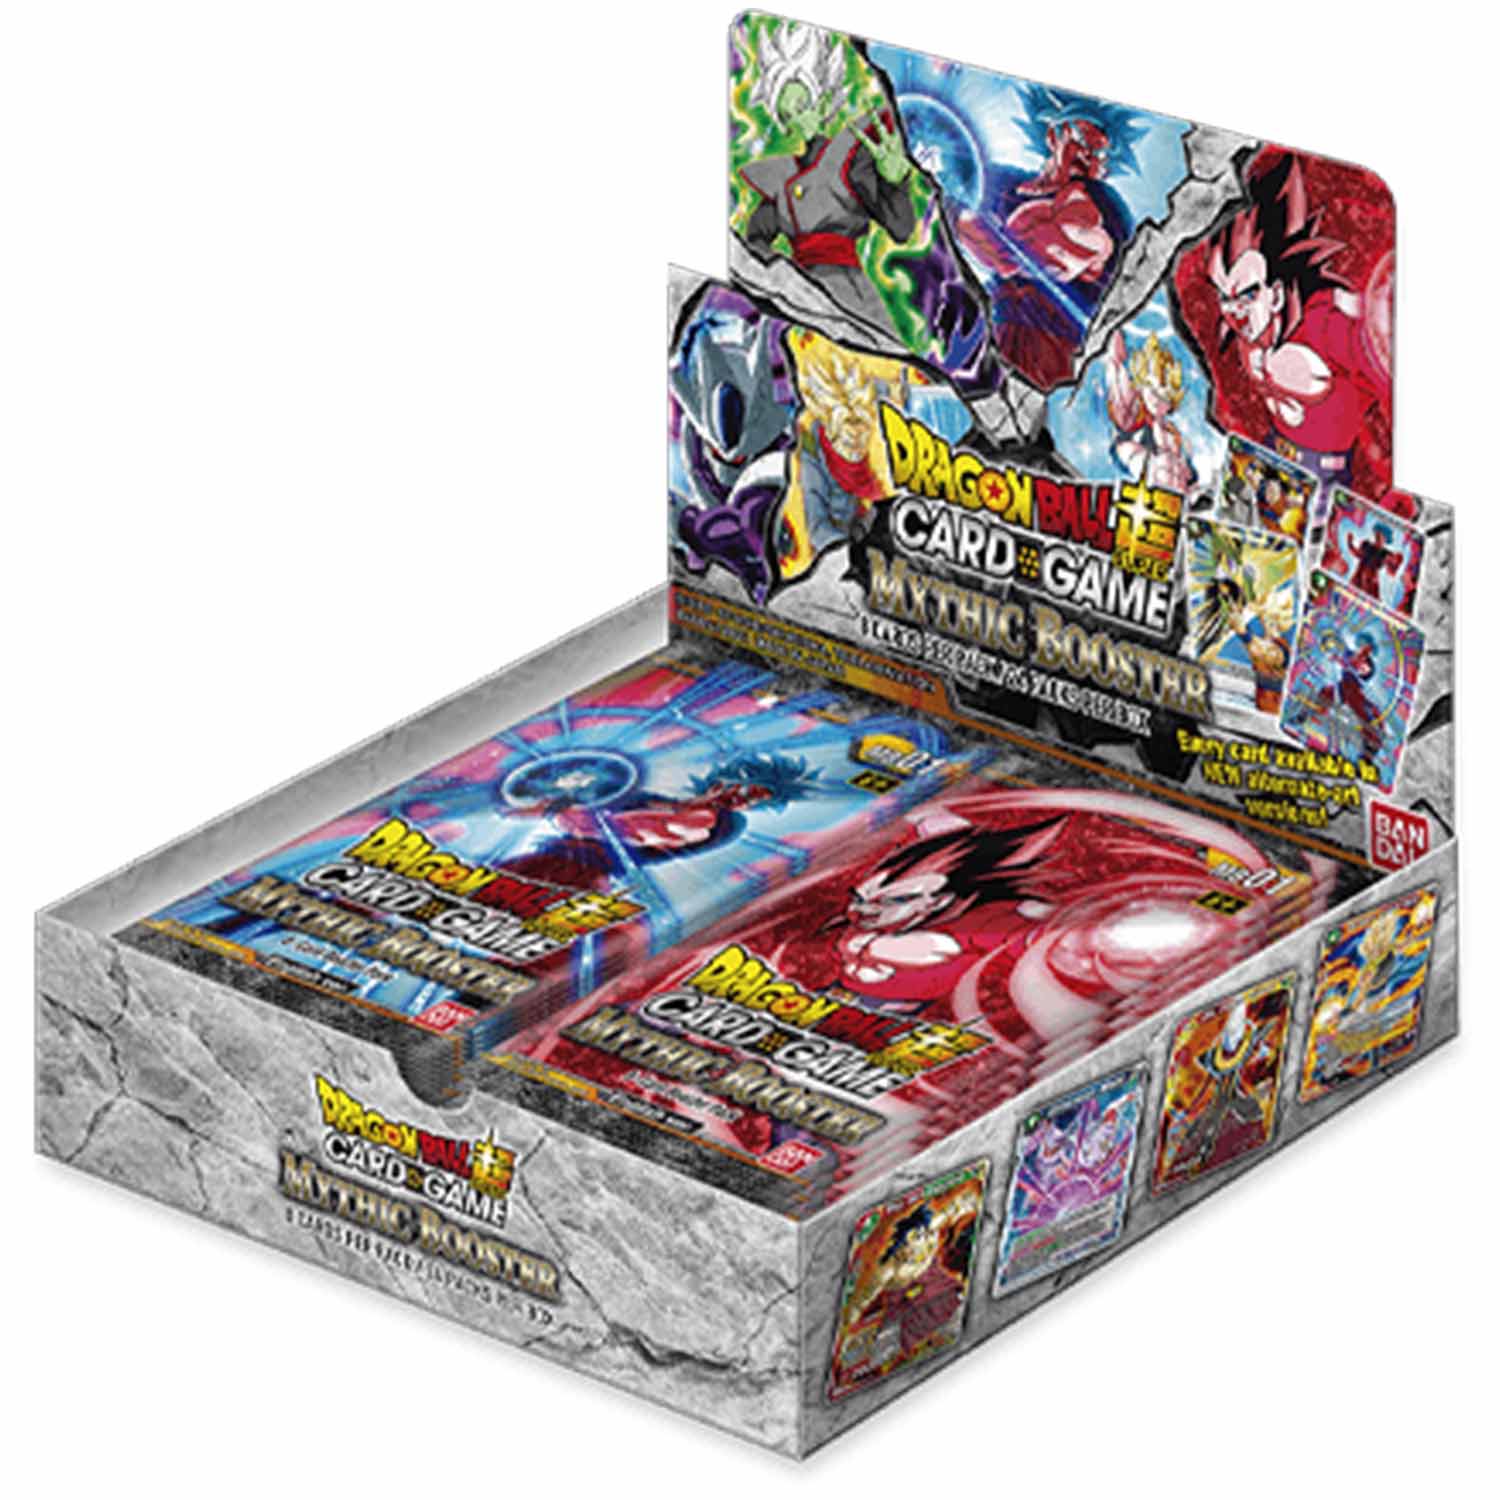 Mythic Booster MB01 Booster Display - 1st Edition - Dragon Ball Super Card Game - EN